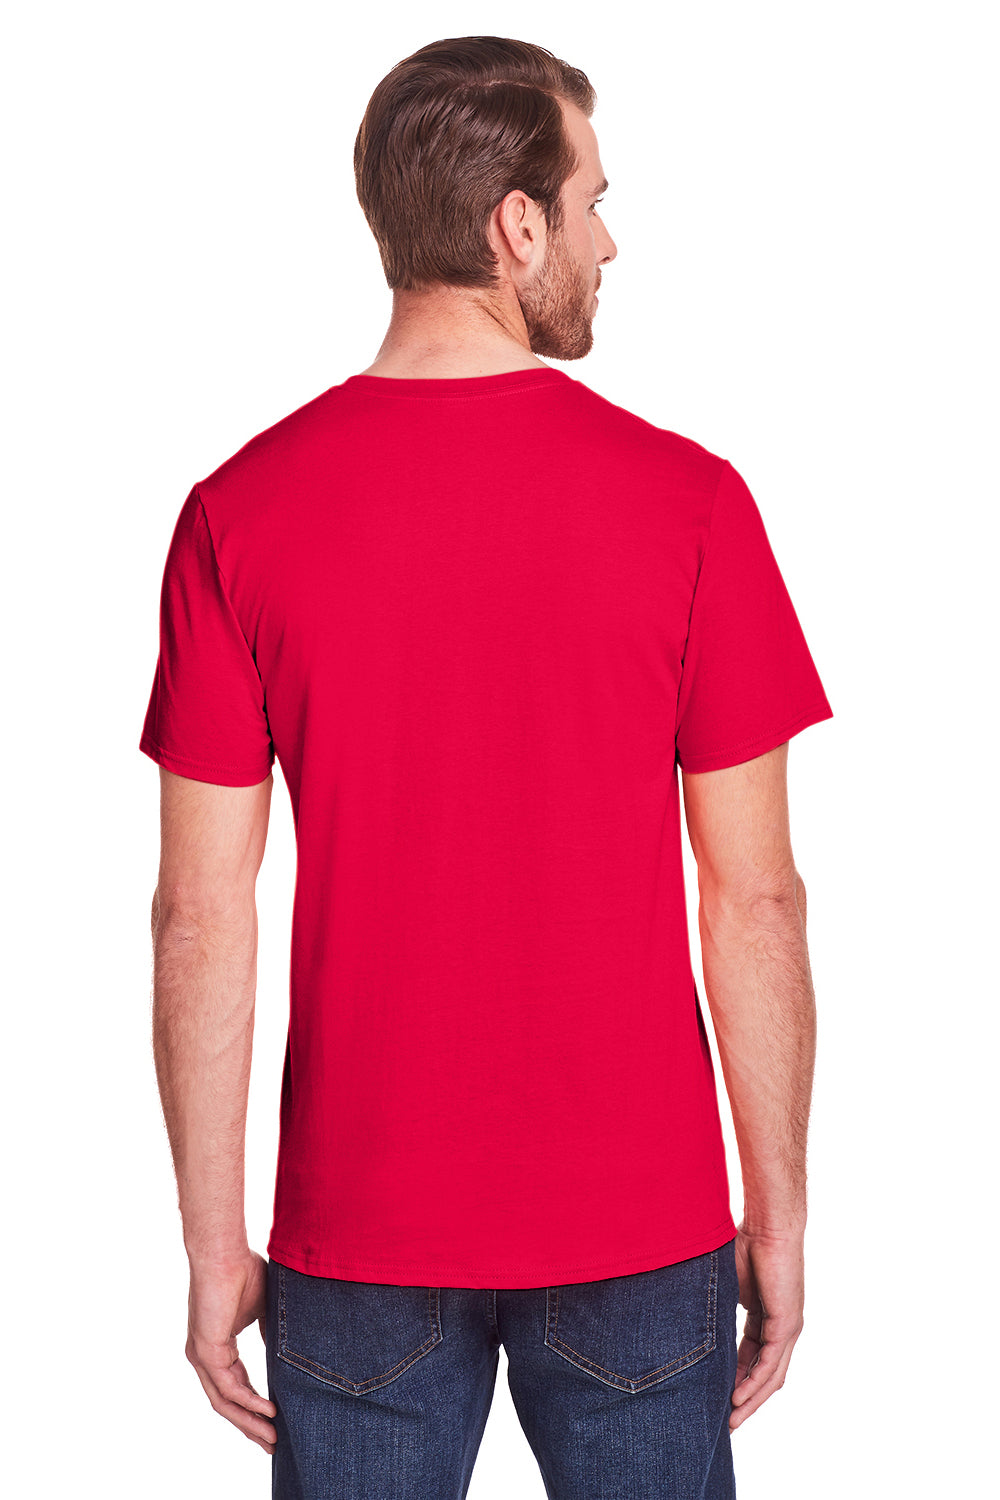 Fruit Of The Loom IC47MR Mens Iconic Short Sleeve Crewneck T-Shirt Red Back